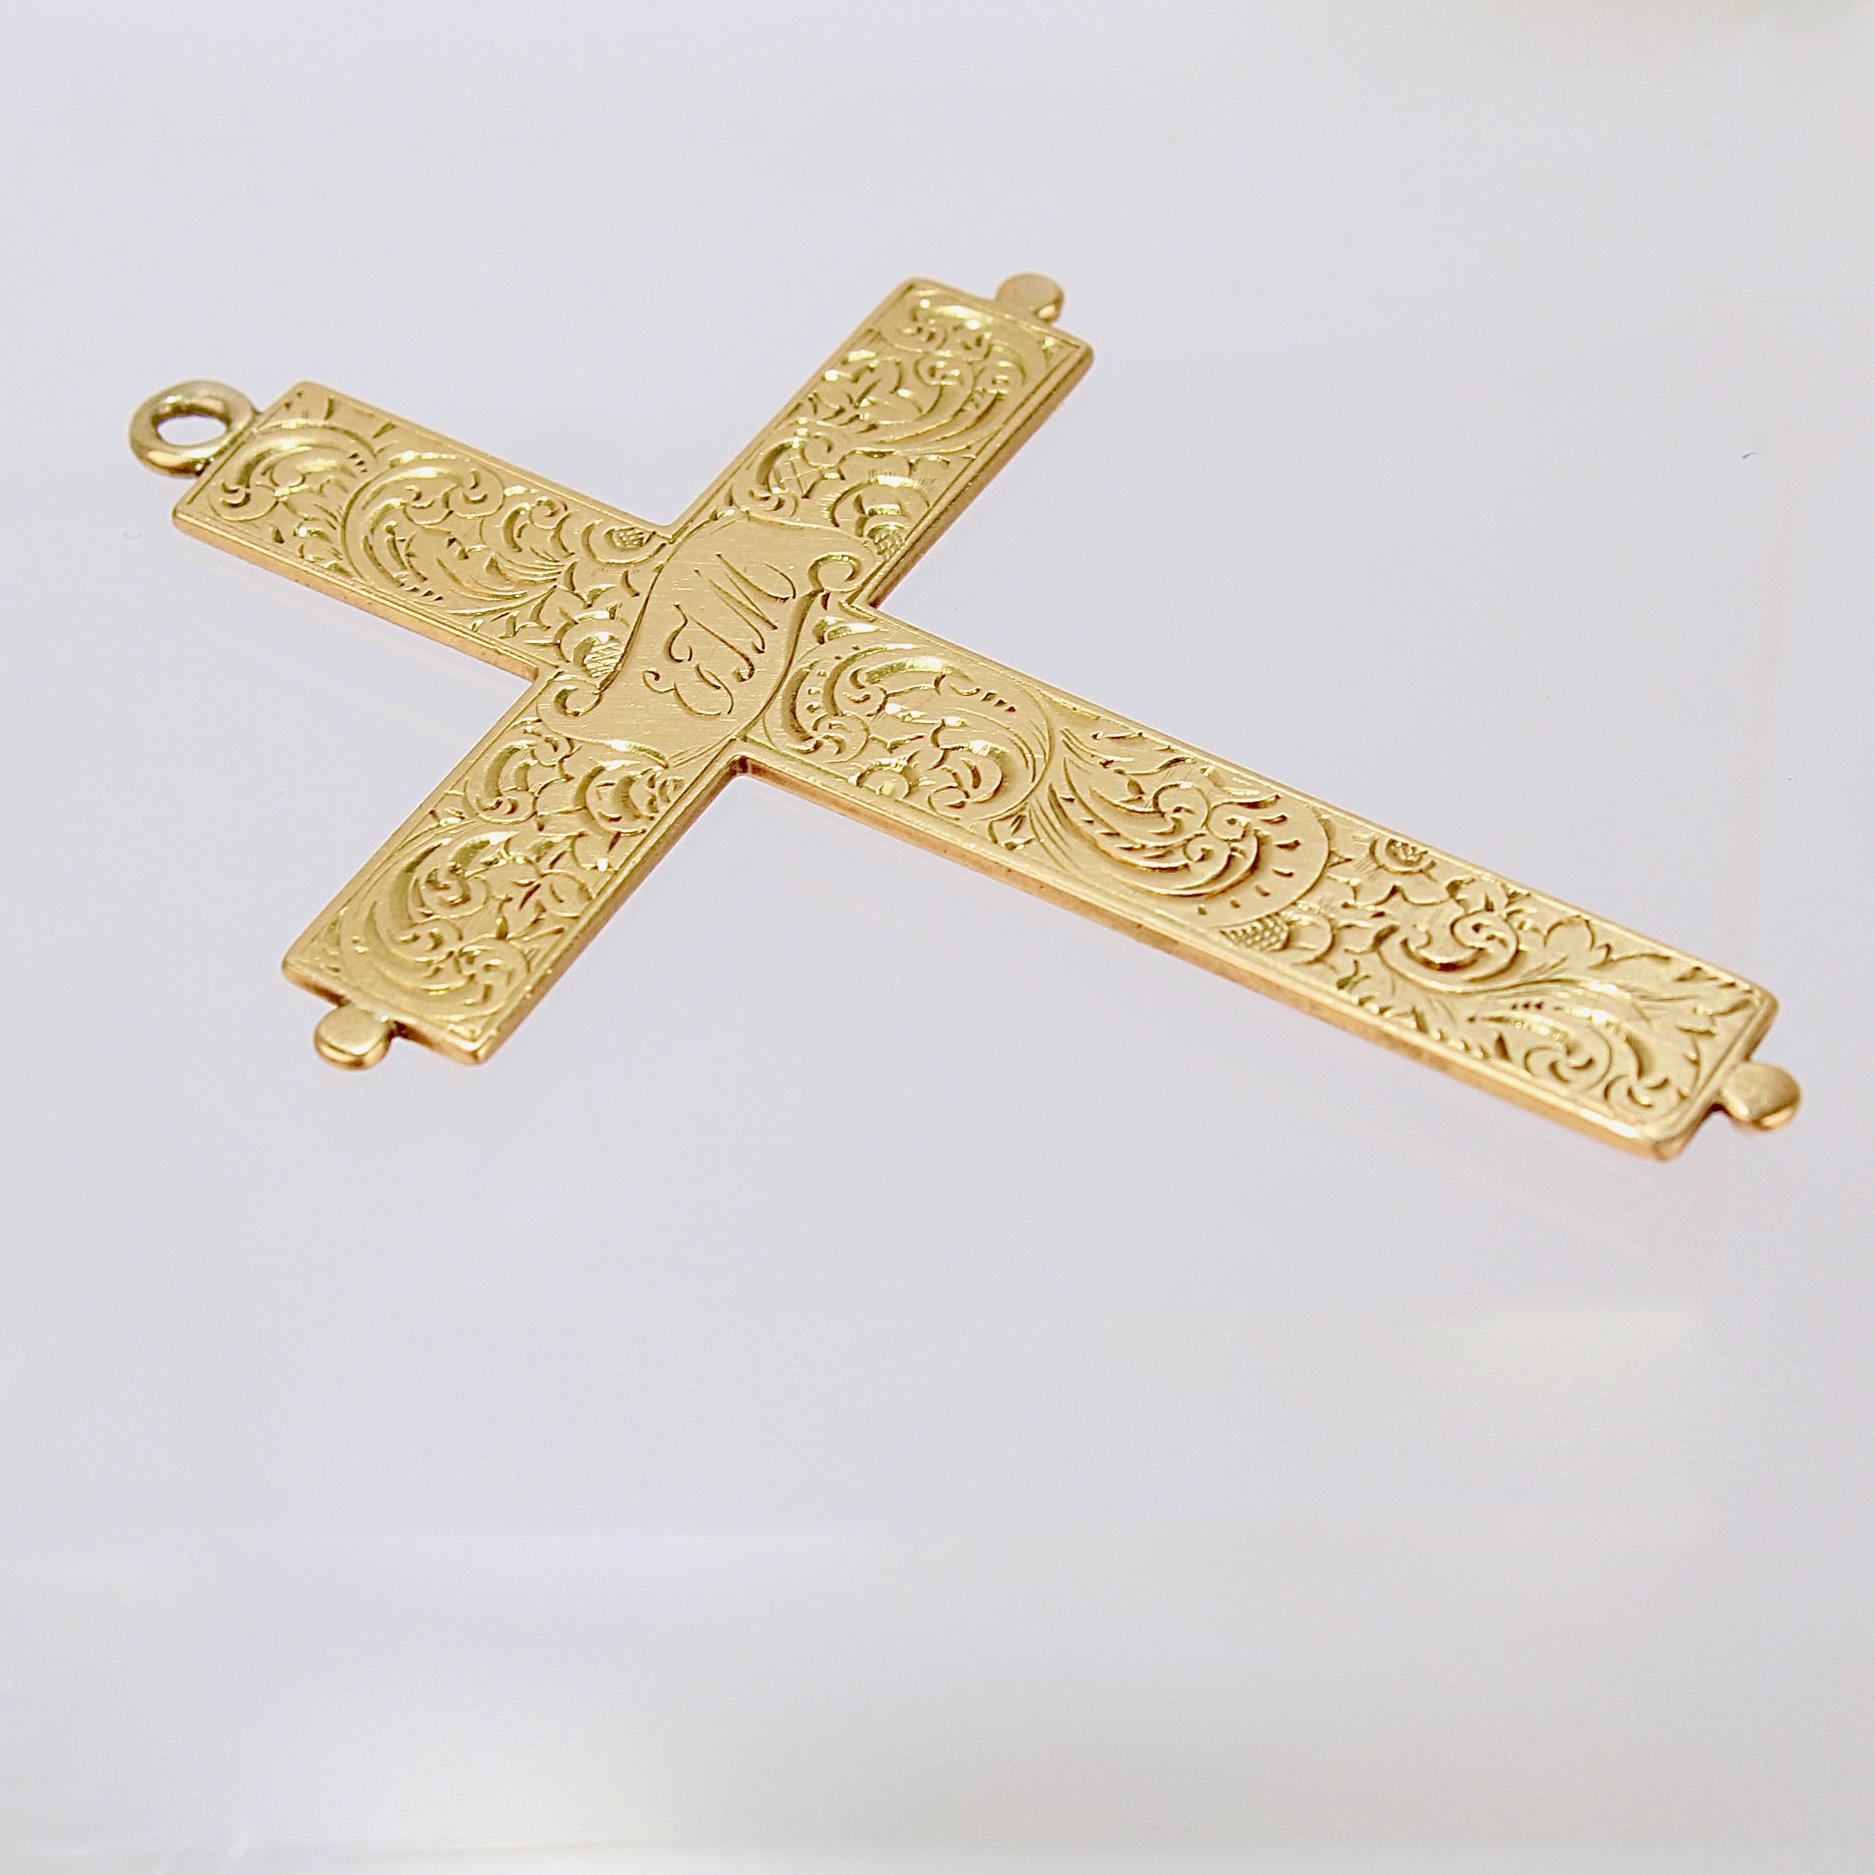 Antique Edwardian Engraved 14 Karat Gold Crucifix or Cross Pendant In Good Condition For Sale In Philadelphia, PA